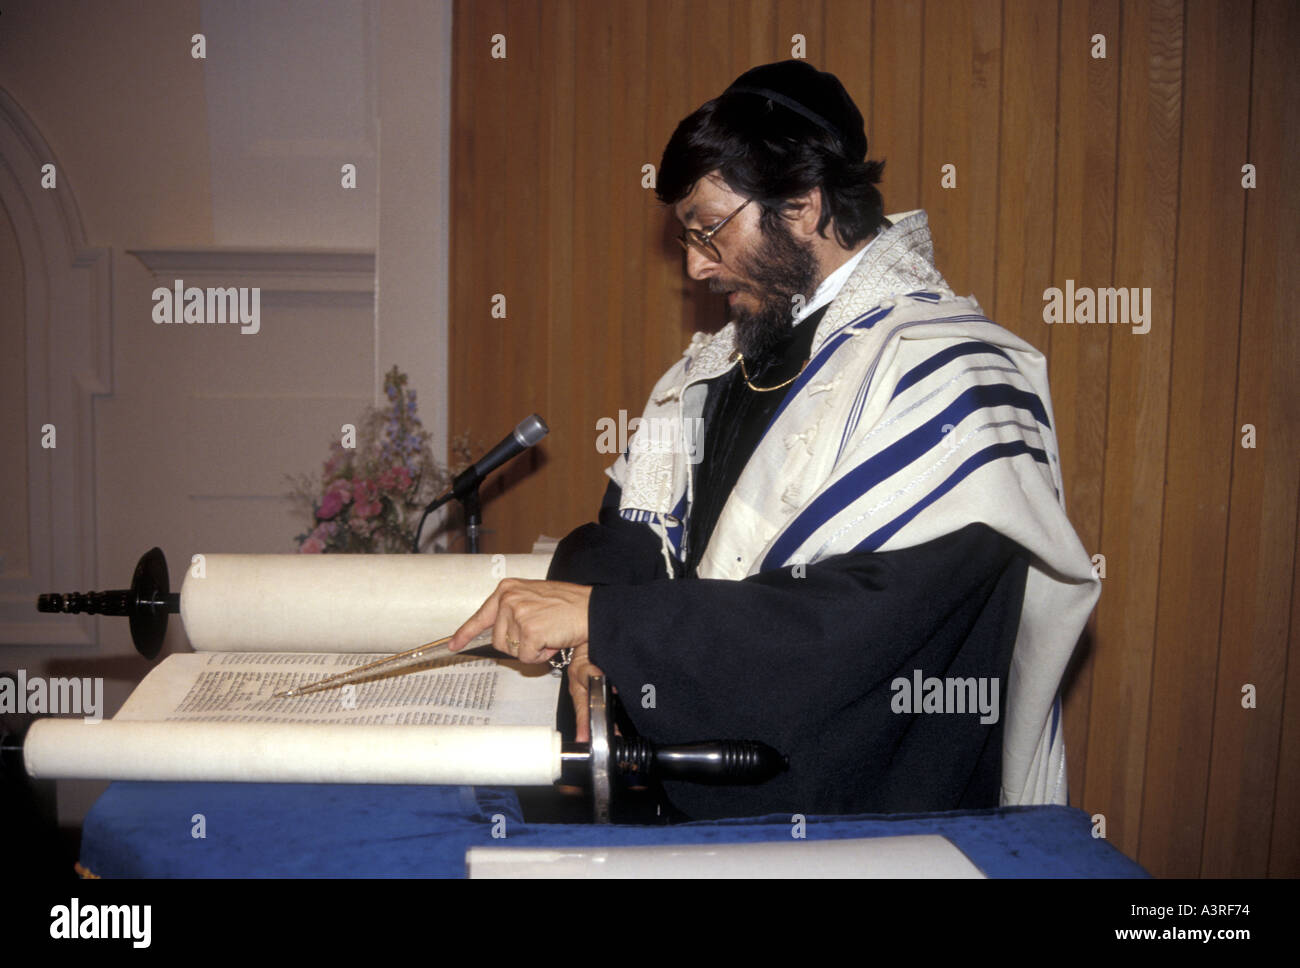 A Rabbi using a yad, or pointer, to read from the torah scrolls in a London reformed synagogue Stock Photo